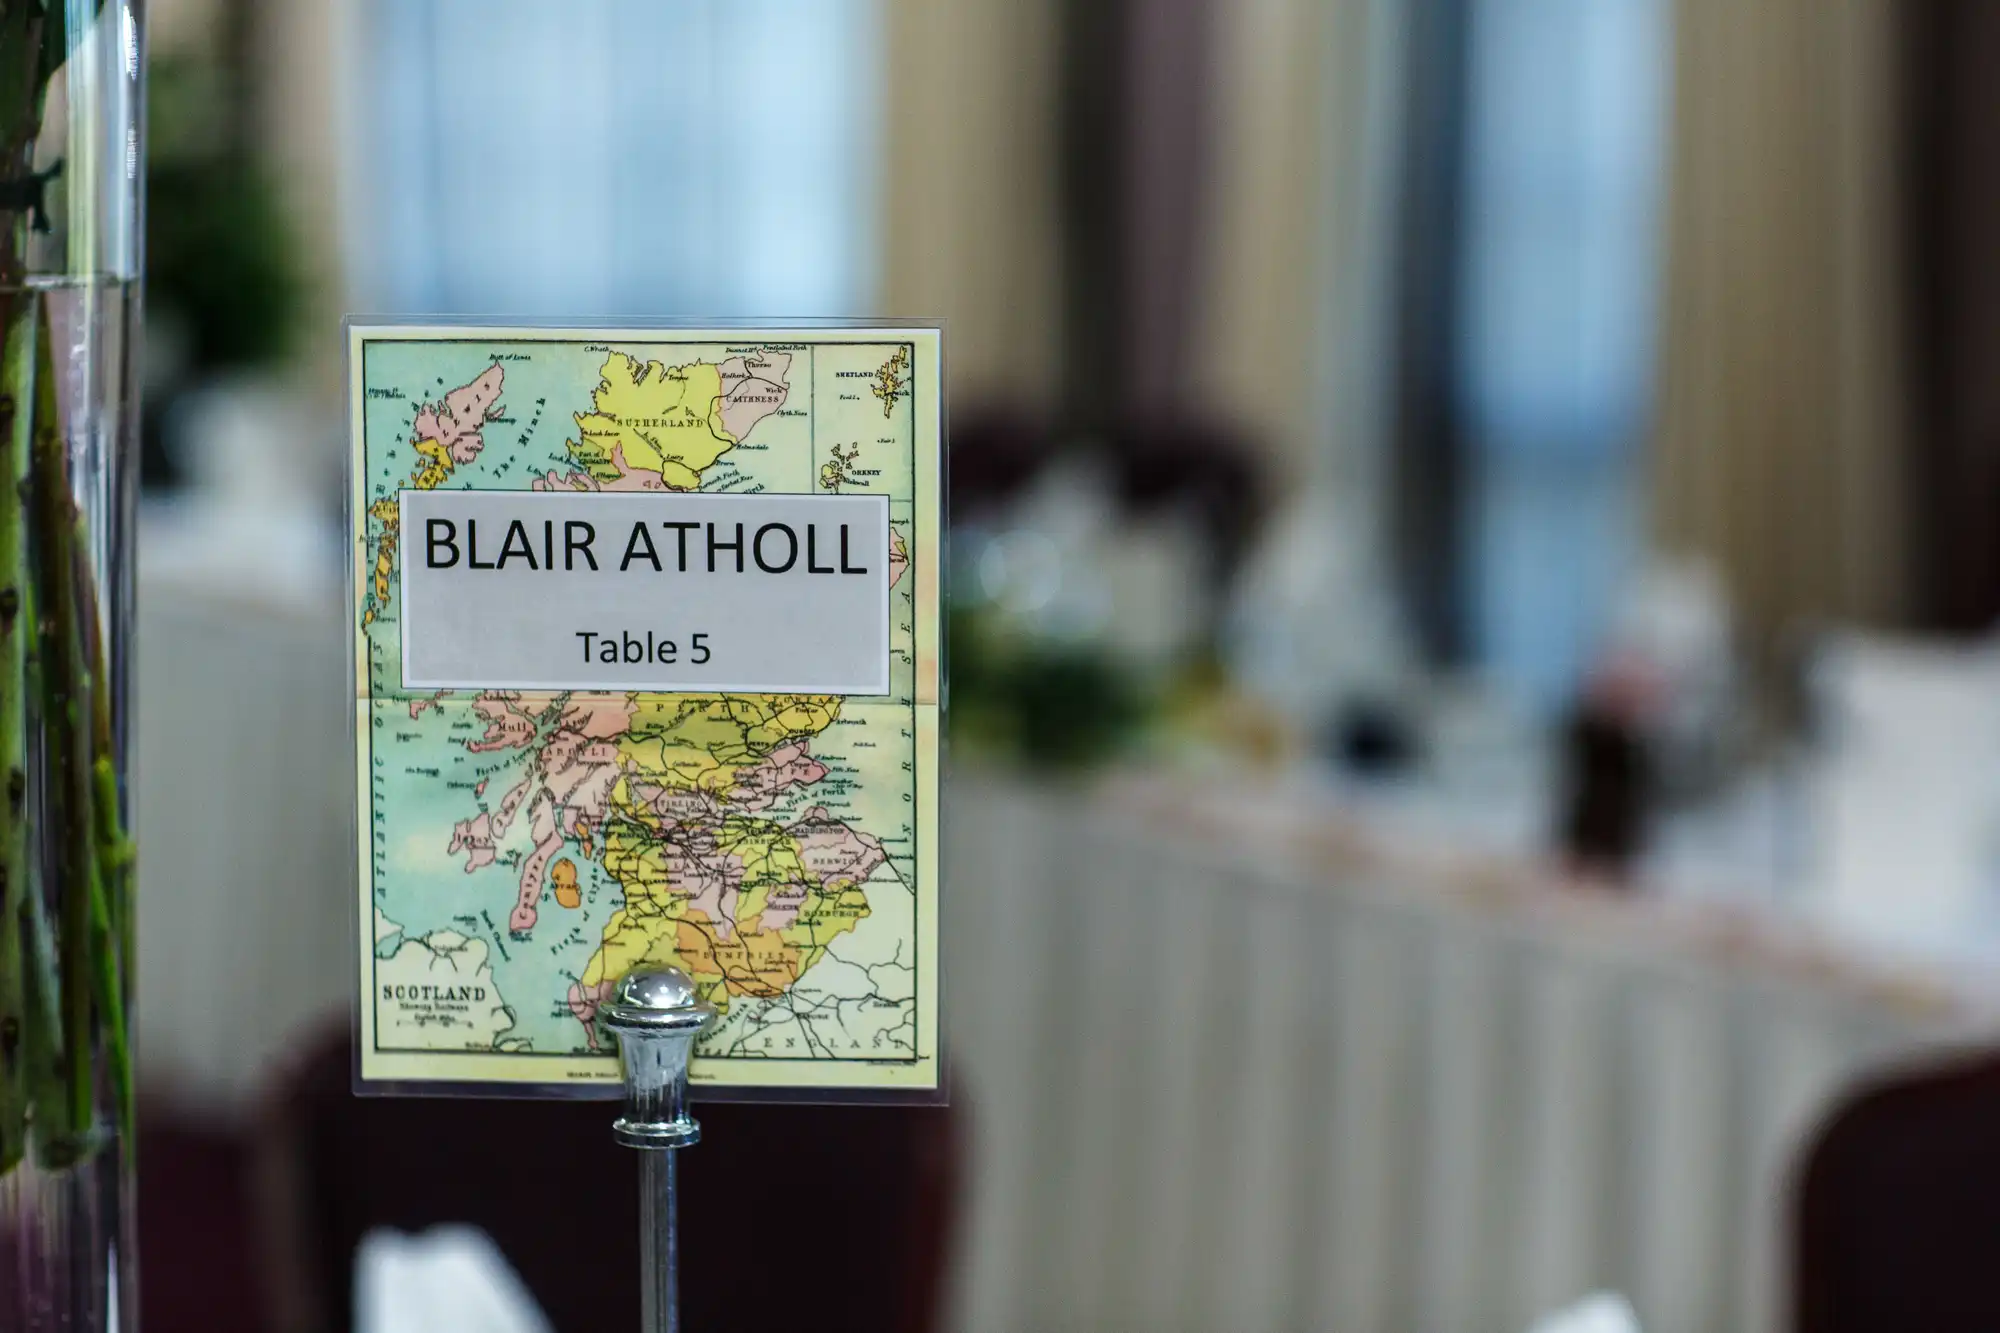 A table marker with "blair atholl - table 5" over a colorful map, with a blurred background of a banquet hall.